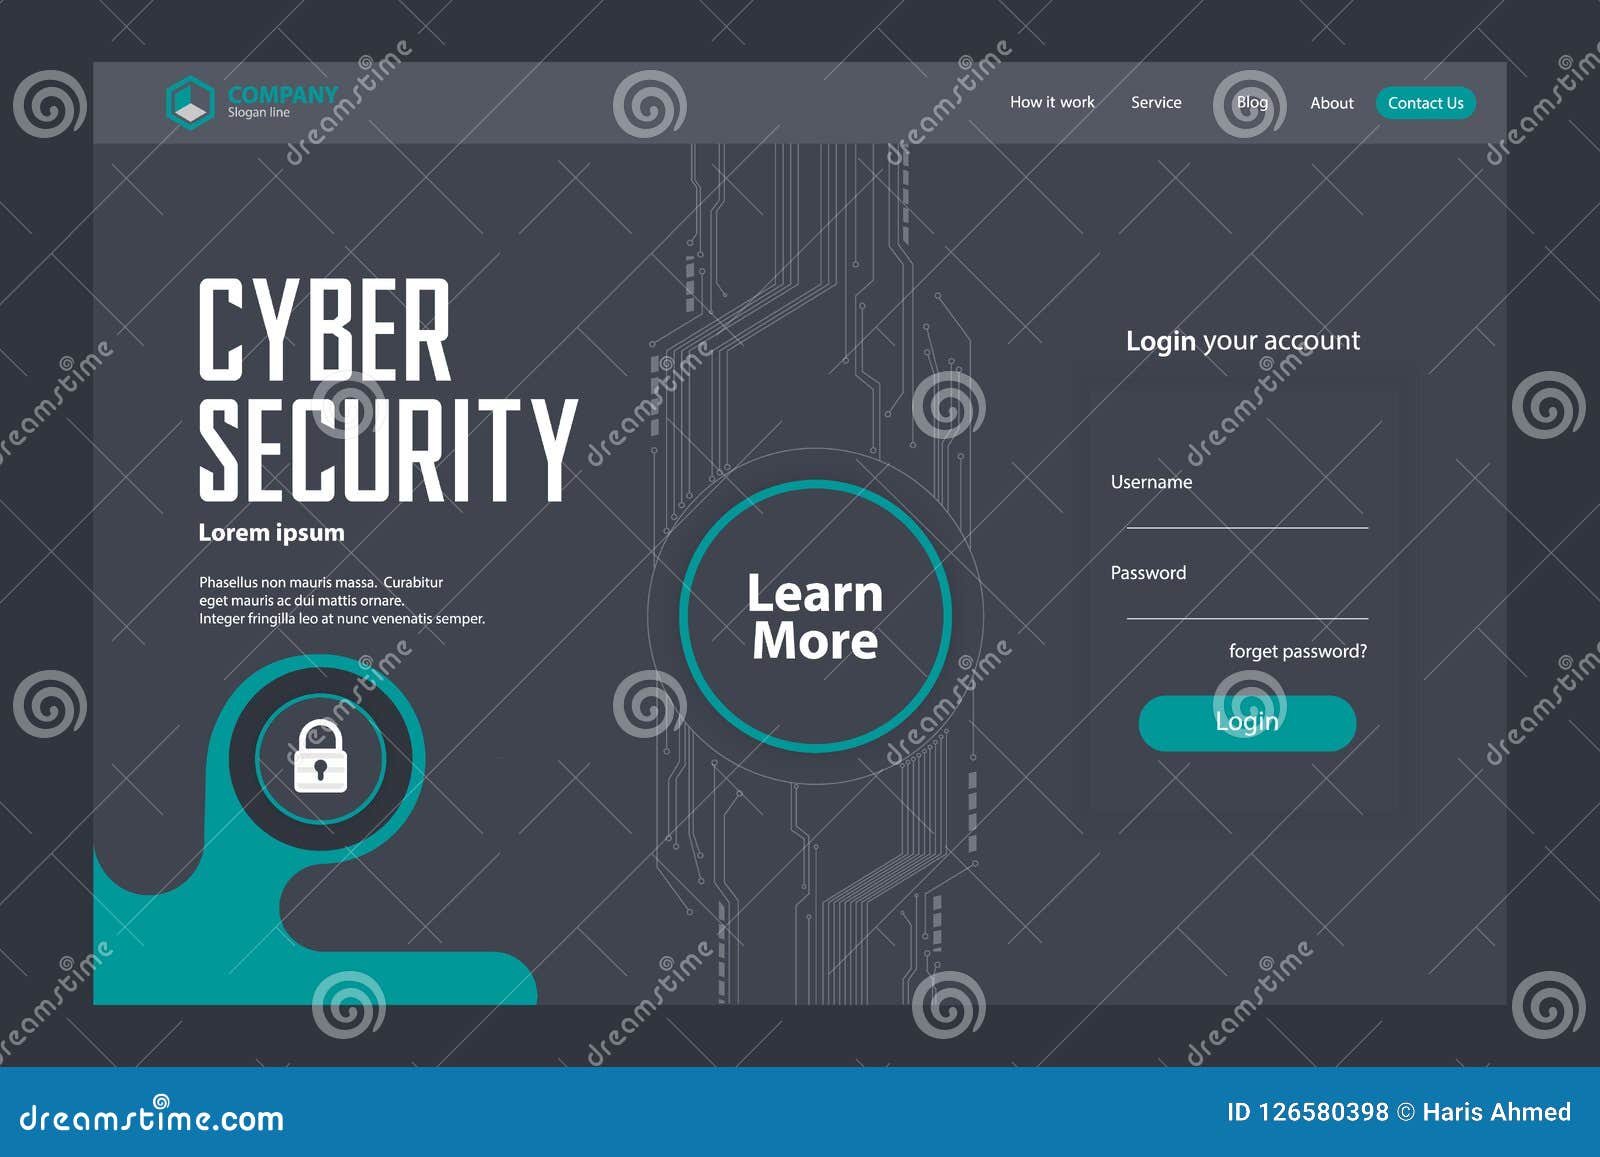 Cyber Security Landing Page Vector Template Design Stock Vector Illustration Of Concept Design 126580398